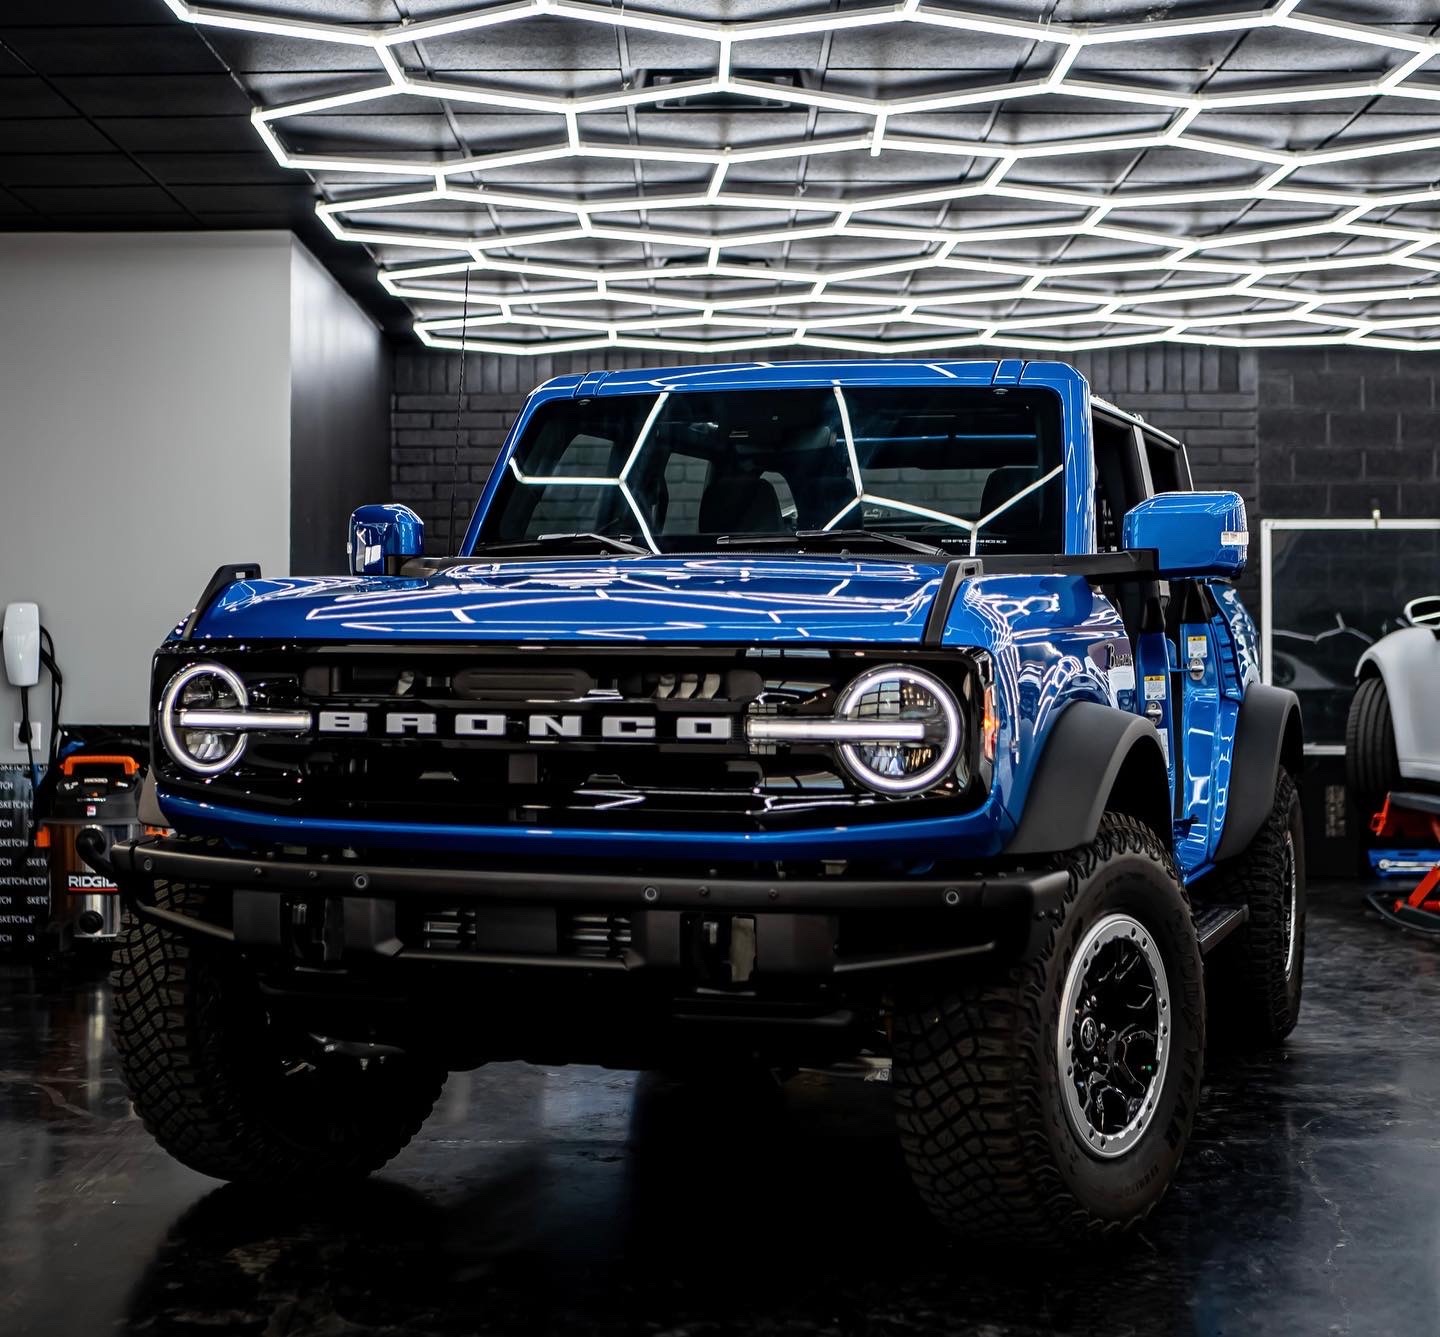 Ford Bronco Consumer Reports: Ford Bronco is Most Satisfying Midsize Two-Row SUV to Own BA4C3A06-8729-4108-9F09-20638358198E